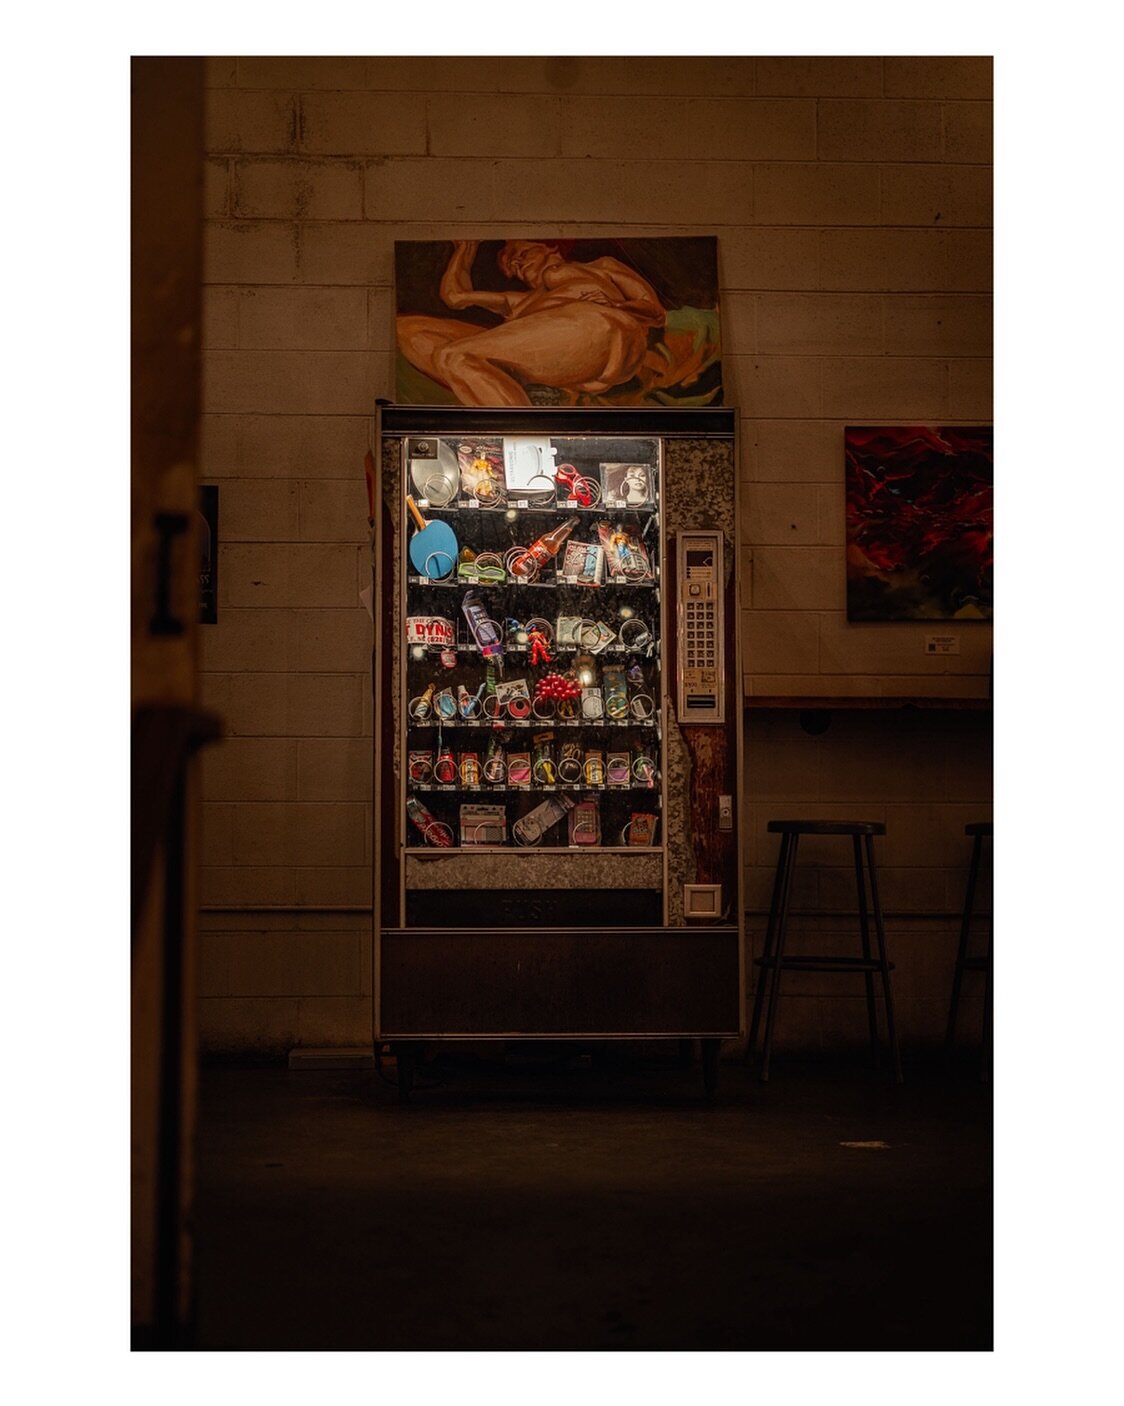 All your shopping needs in one place. 
.
.
.
.
.
#asheville #ashevillenc #burial #brewery #vendingmachine #canonphotography #eosr5 #50mm